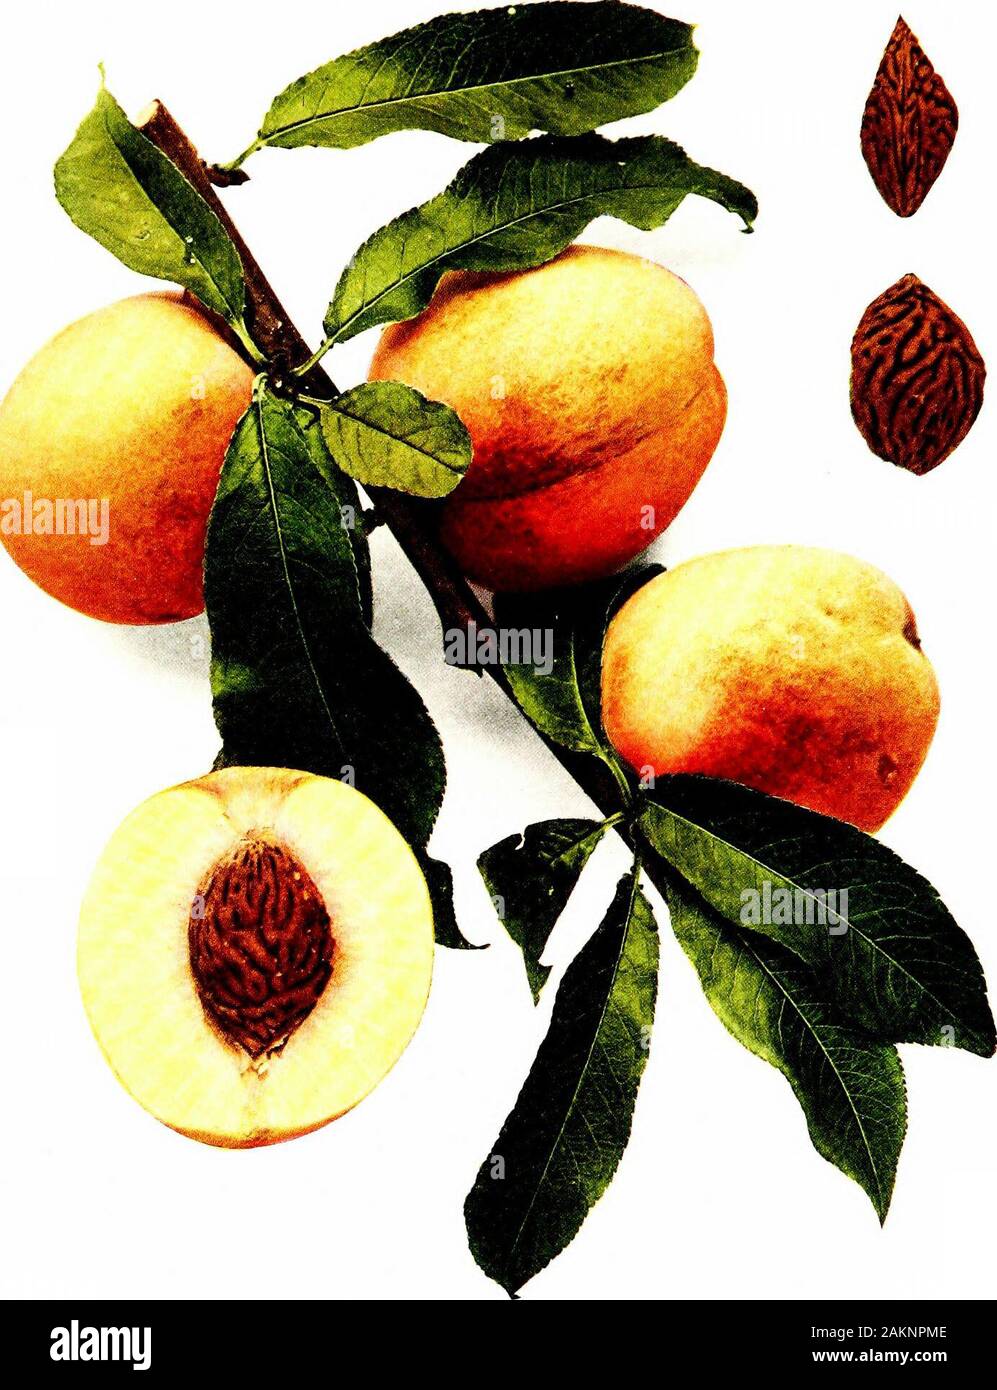 The peaches of New York . ine large, reddish-brown or grayish, mixed glandsusually on the leaf. Flower-buds long, conical or obtuse, plimip, somewhat appressed, pubescent; seasonof bloom early; flowers pale pink, one and three-fovuths inches across, well distributed;pedicels short, medium to slender, glabrous, green; calyx-tube reddish-green, orange-coloredwithin, obconic, glabrous; calyx-lobes broad, usually acute, glabrous within, pubescentwithout; petals ovate, notched near the base, tapering to long, narrow claws variablein color at the base; filaments one-half inch long, shorter than the Stock Photo